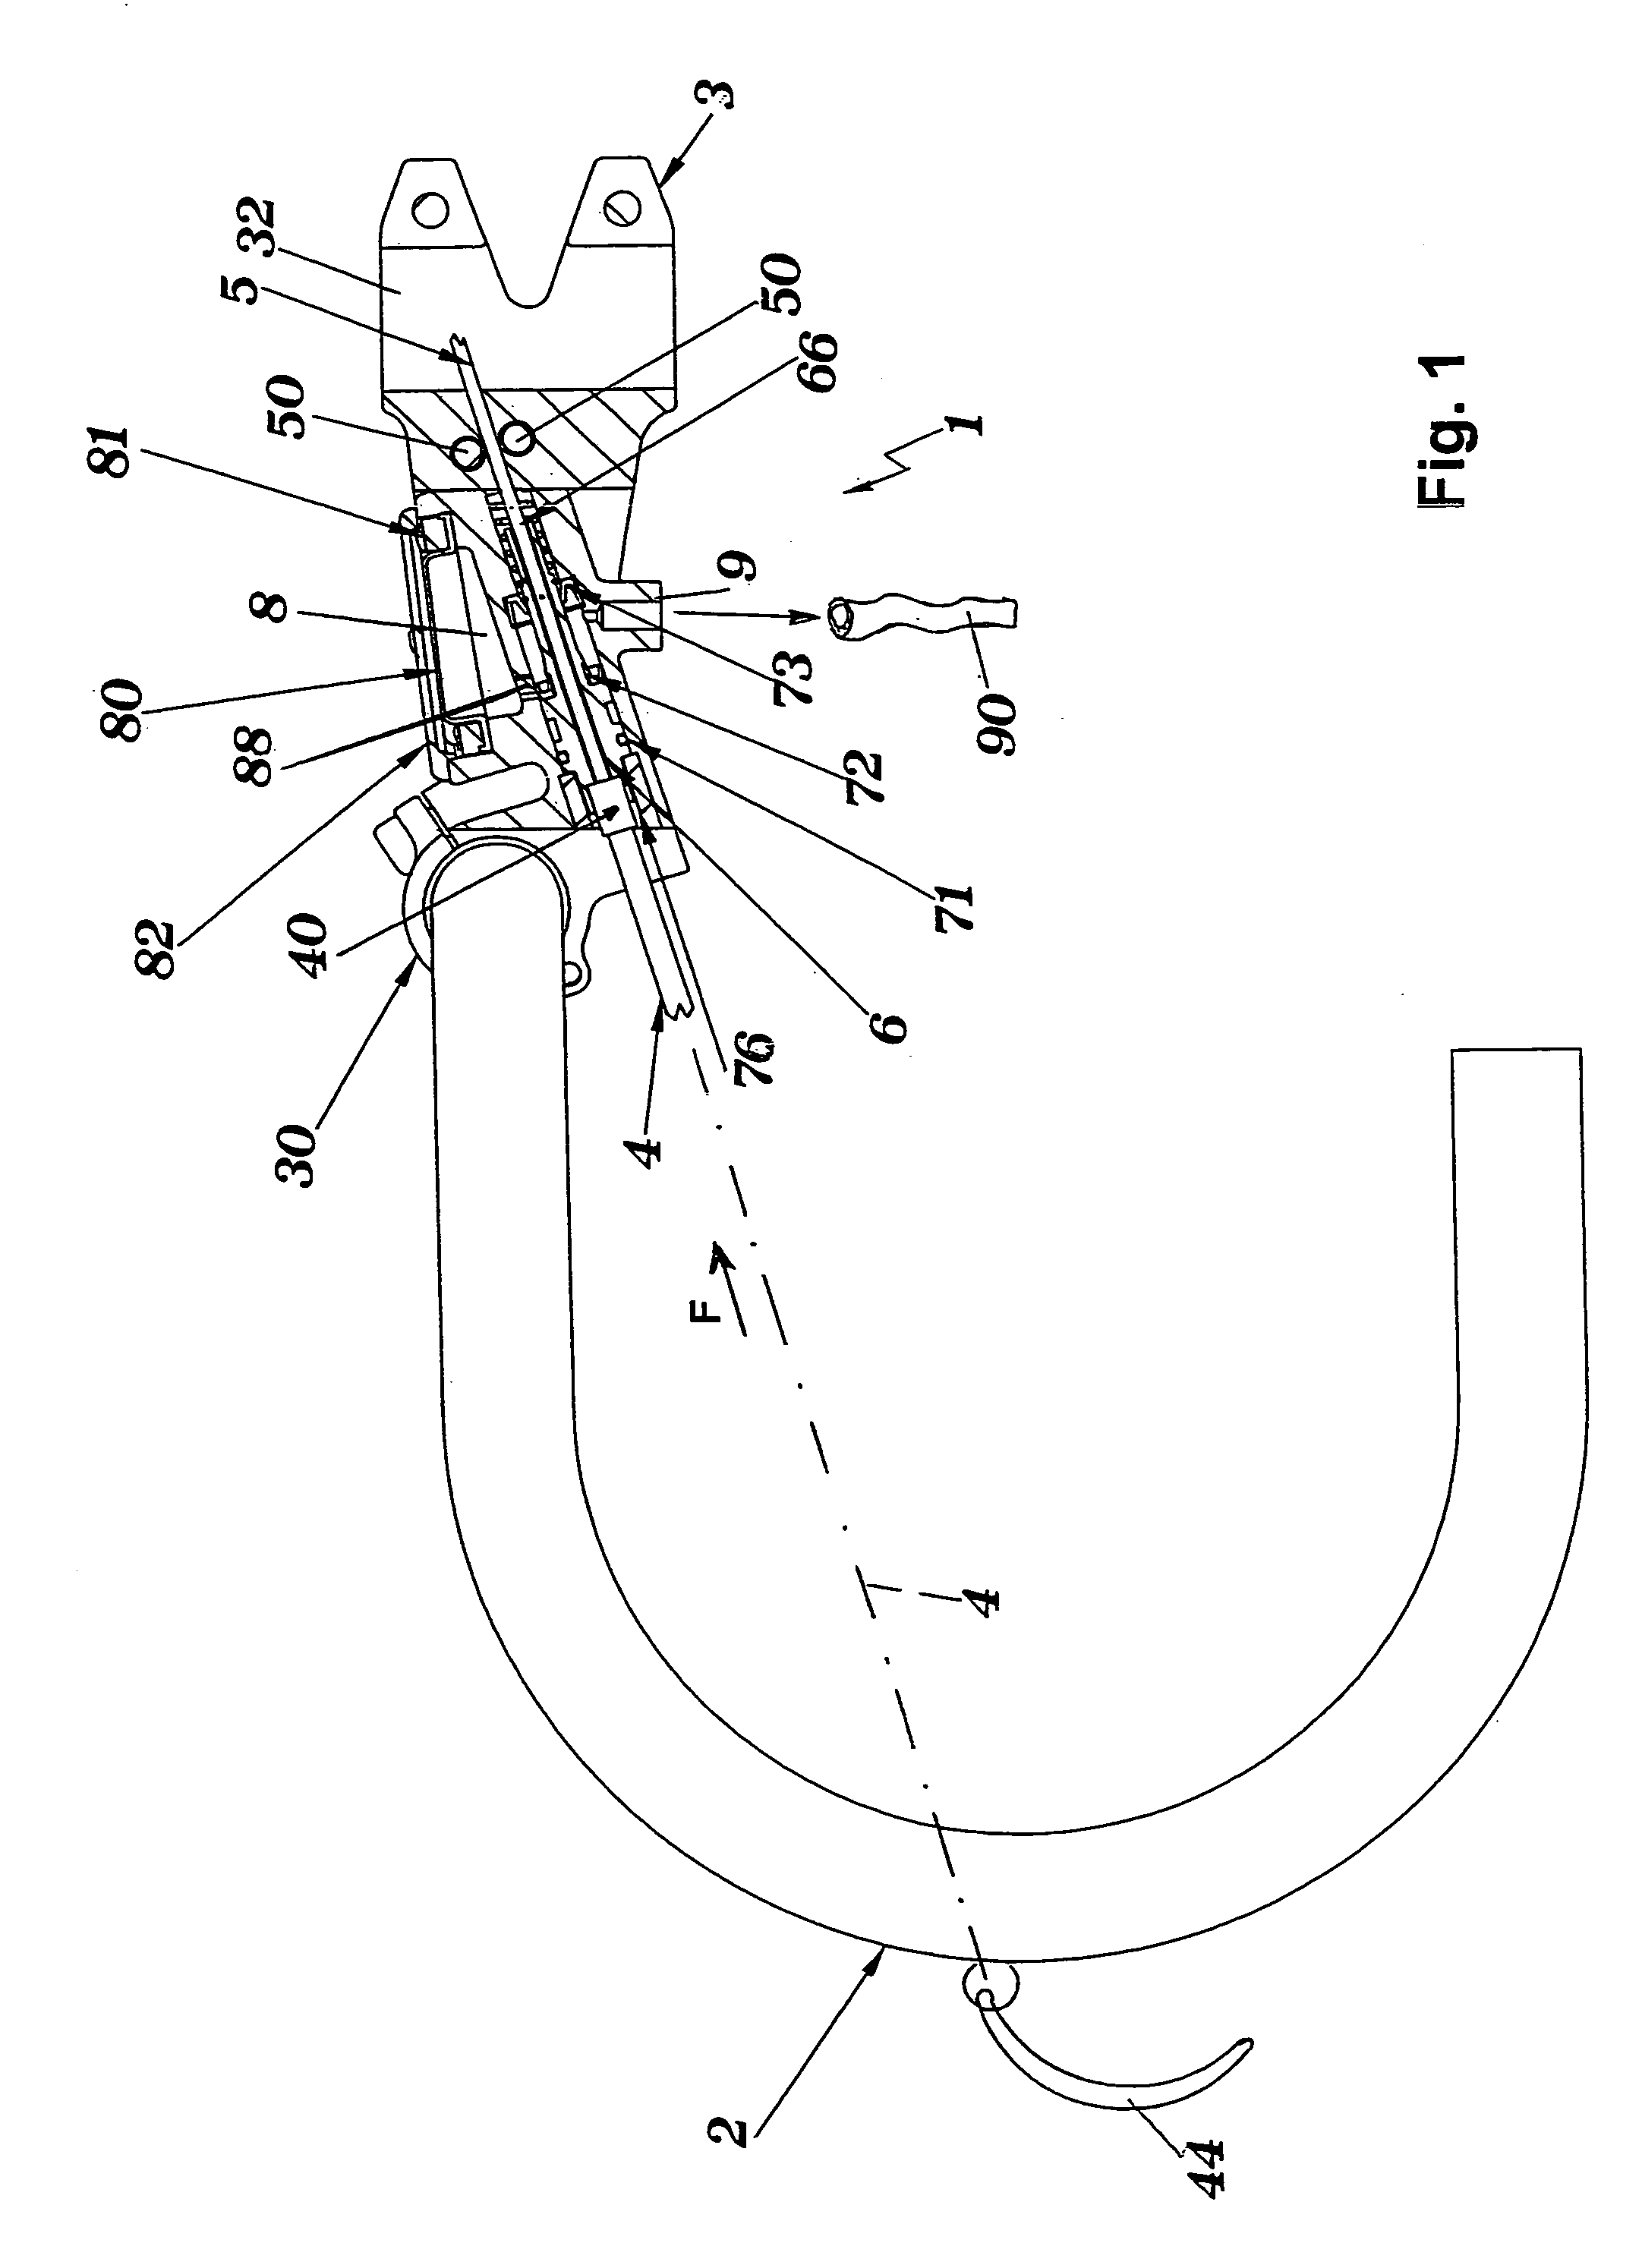 Apparatus for the control of brakes in bicycles and the like